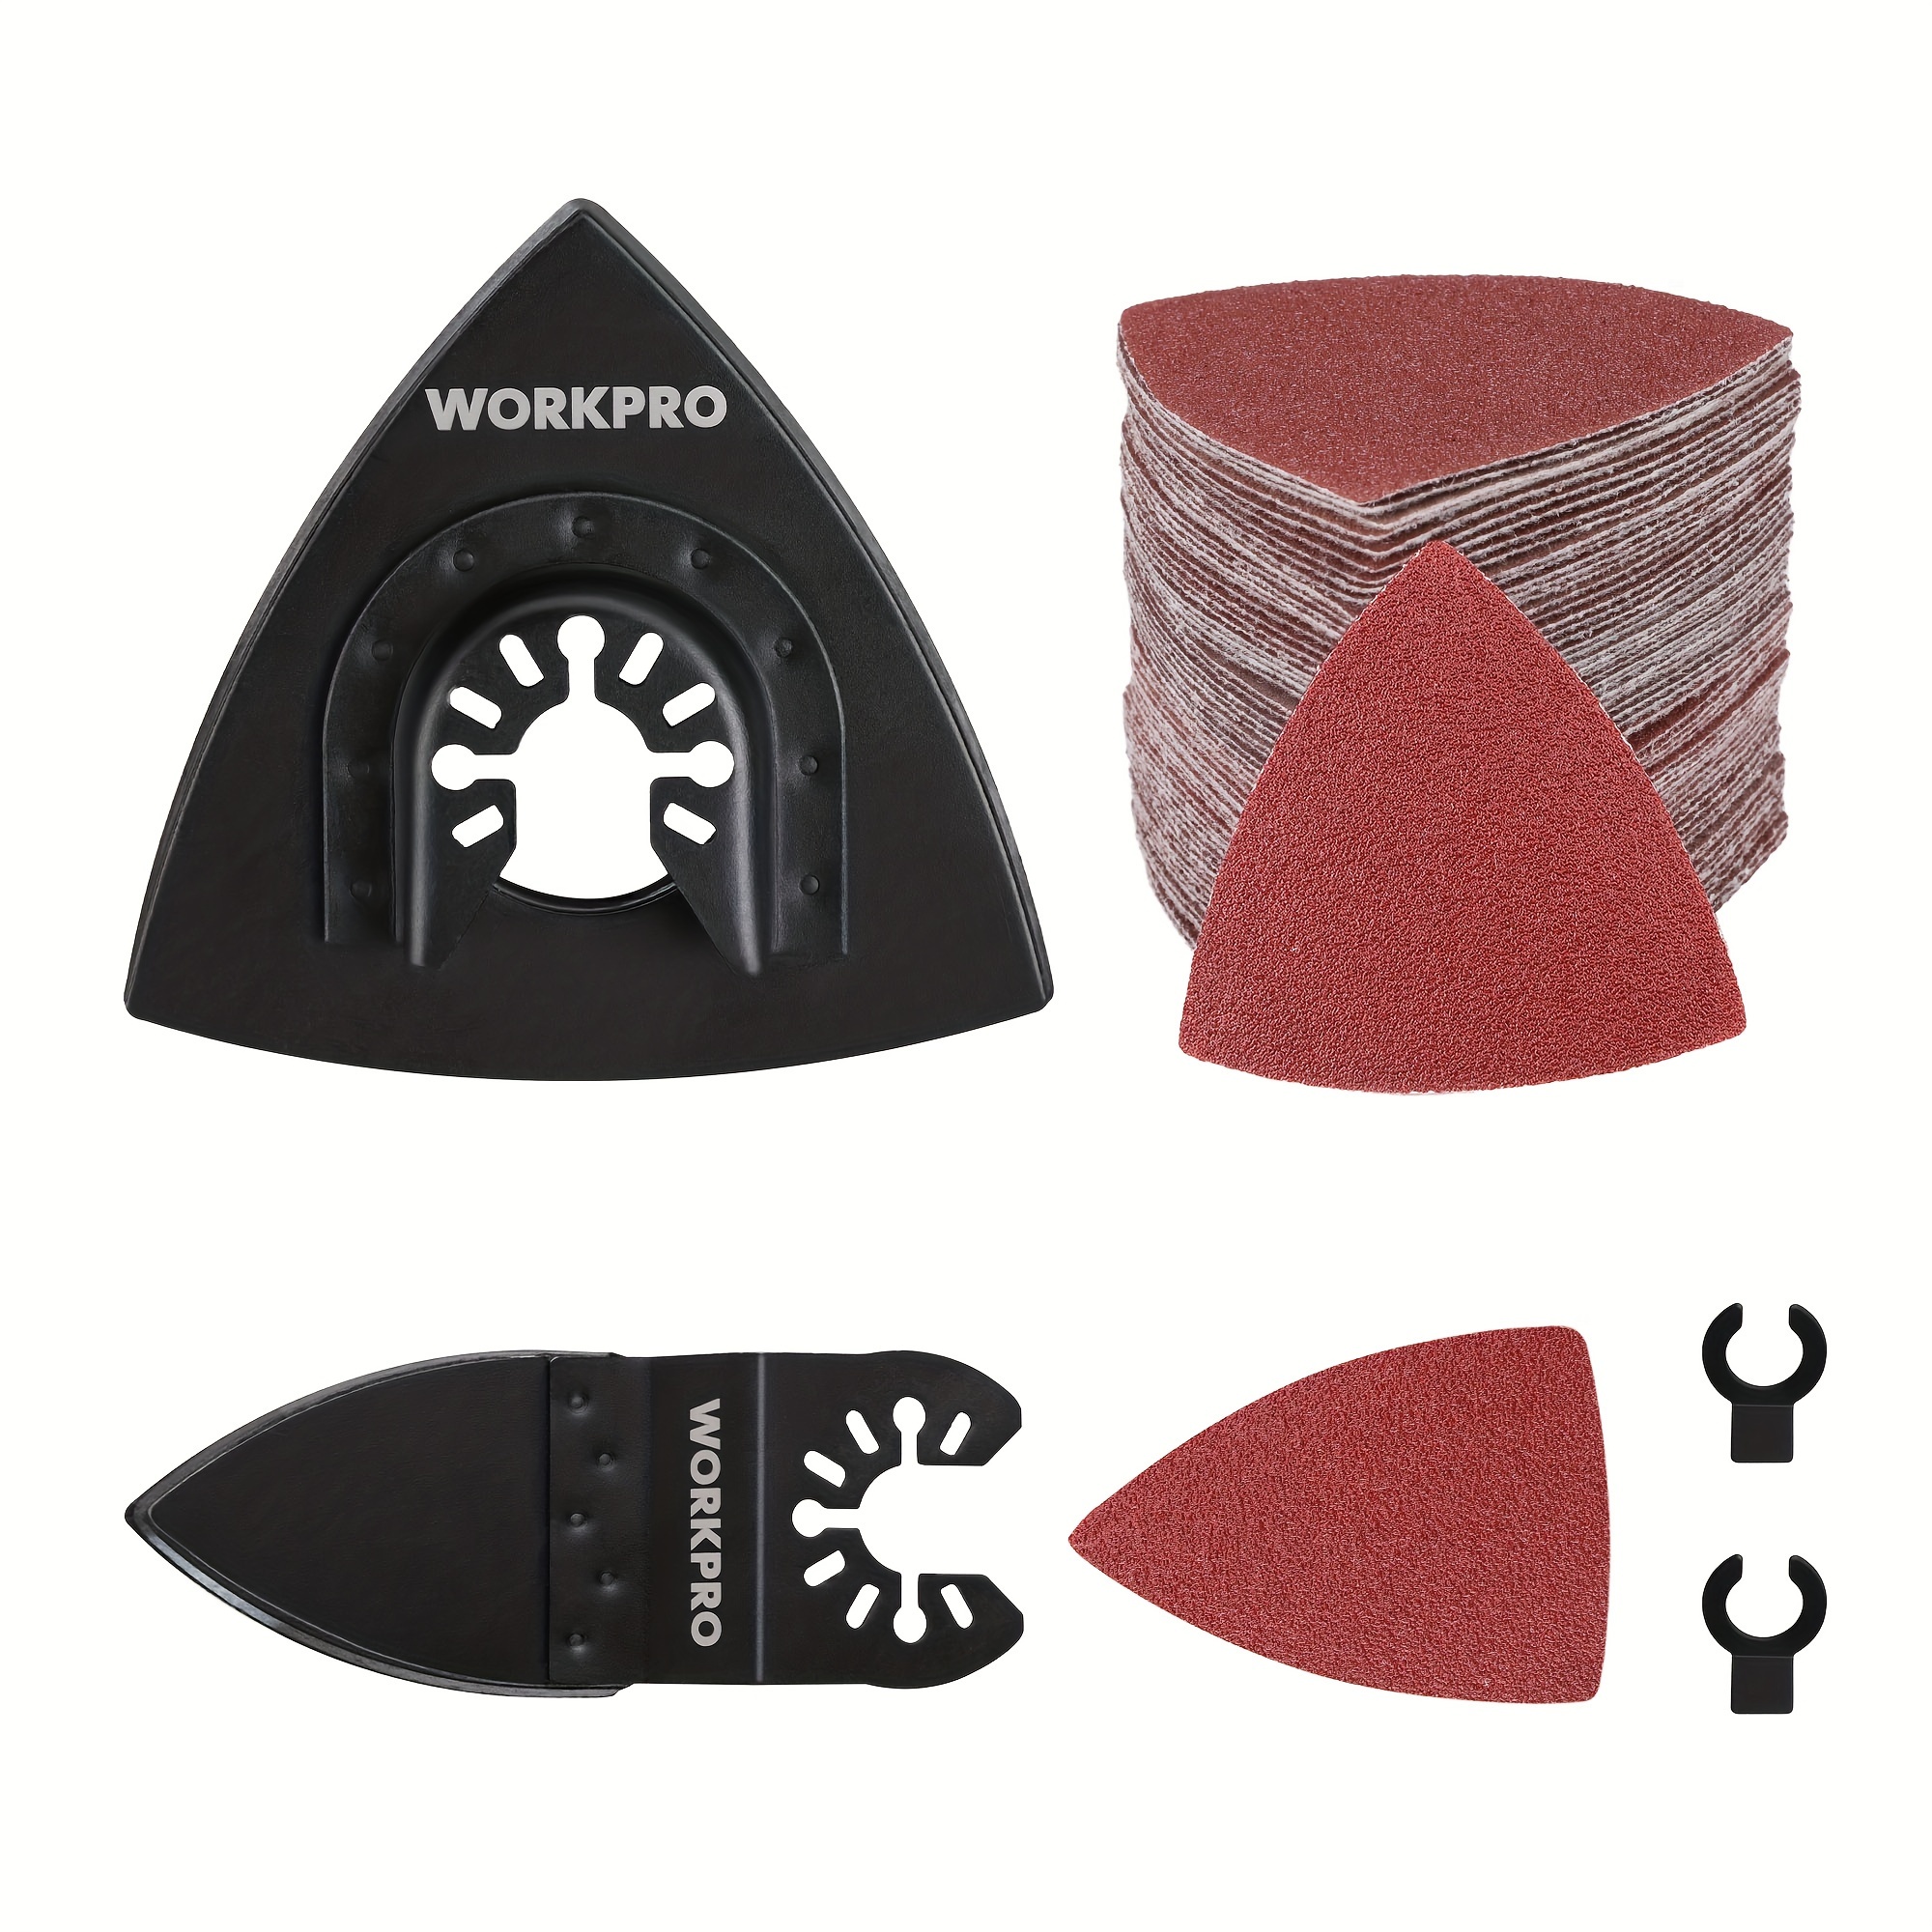 

Workpro 124 Pcs Sanding 3-1/8 Inch Triangular & Finger Oscillating Multi Tool Sand Pads Kits With 2 Adapters - 60, 80, 120, 240 Grits Sandpaper, Triangle Hook And Loop Sanding Sheets